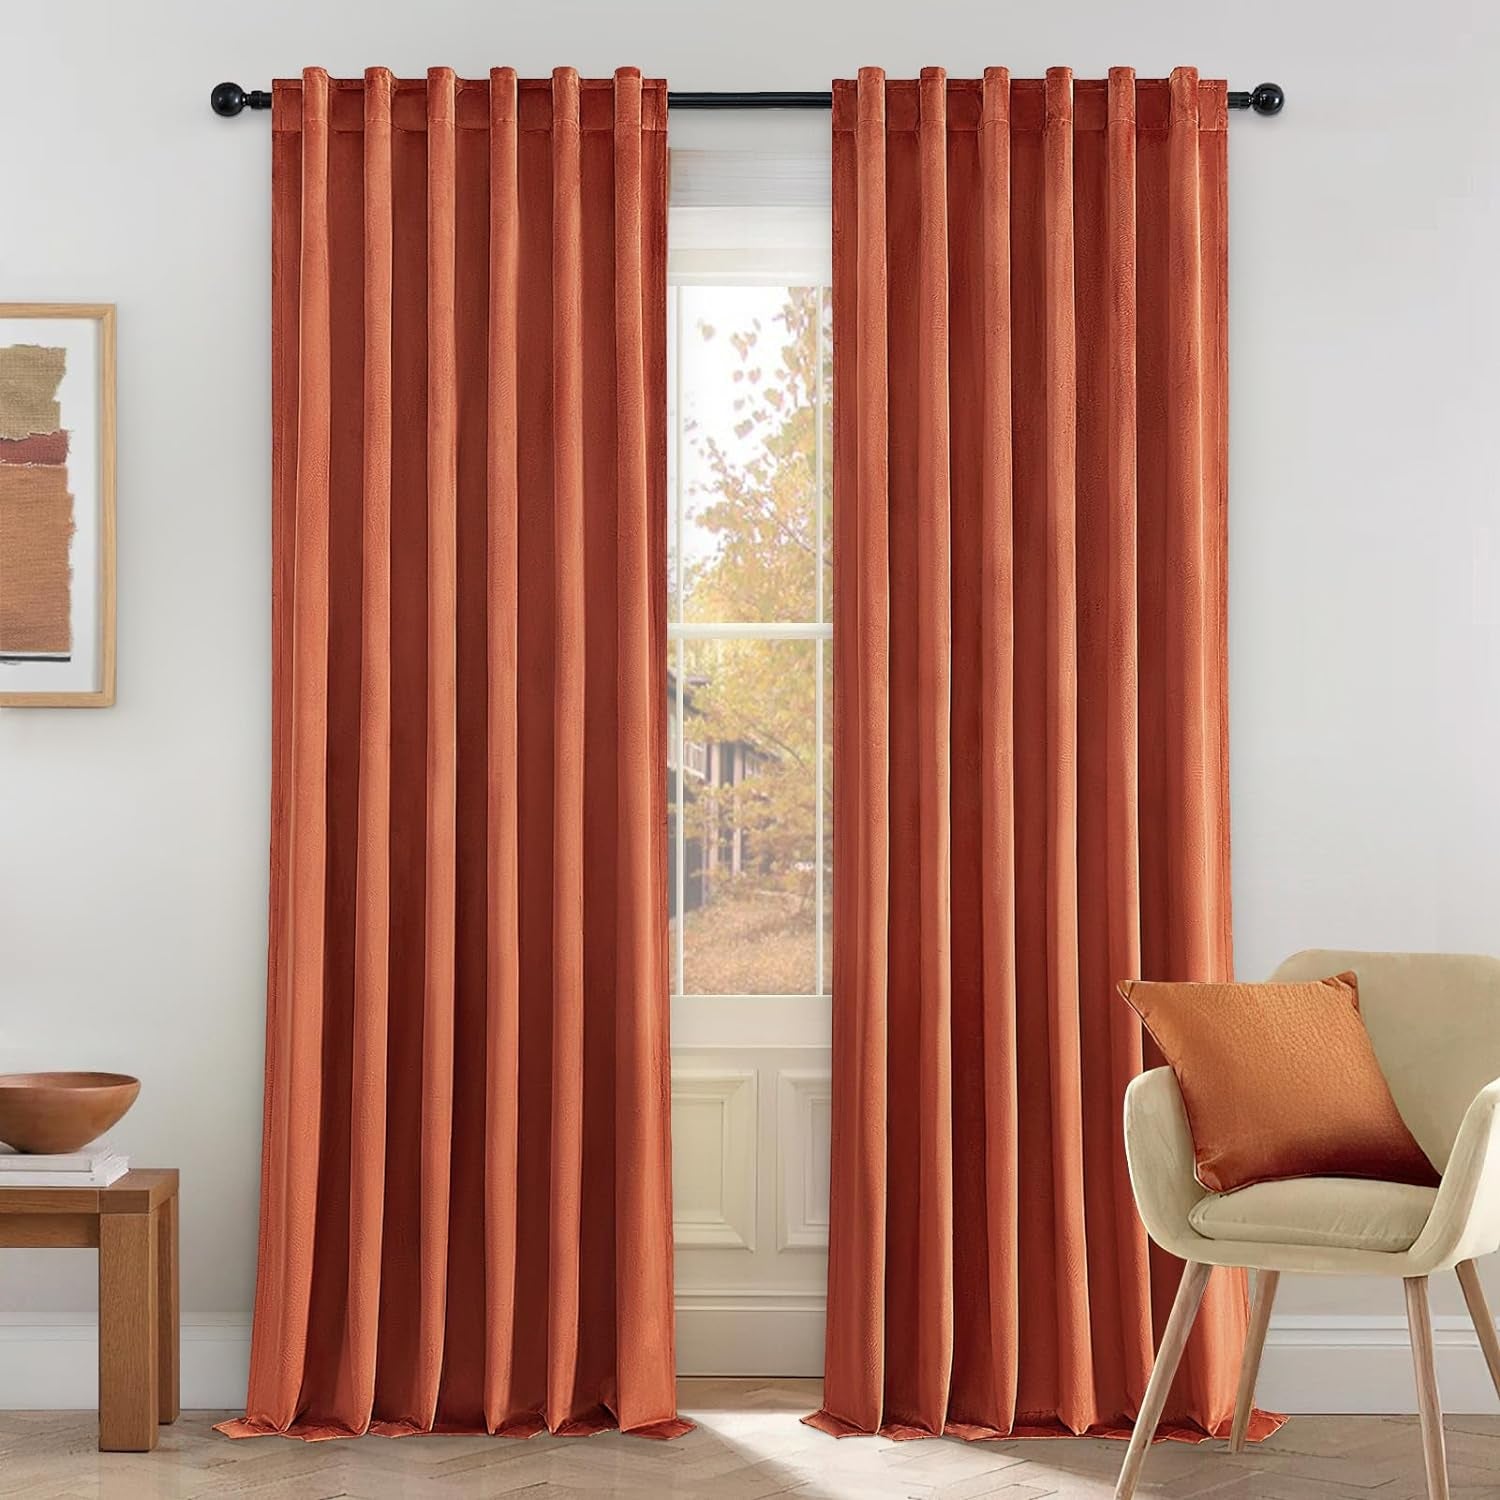 Topfinel Olive Green Velvet Curtains 84 Inches Long for Living Room,Blackout Thermal Insulated Curtains for Bedroom,Back Tab Modern Window Treatment for Living Room,52X84 Inch Length,Olive Green  Top Fine Burnt Orange 52" X 96" 